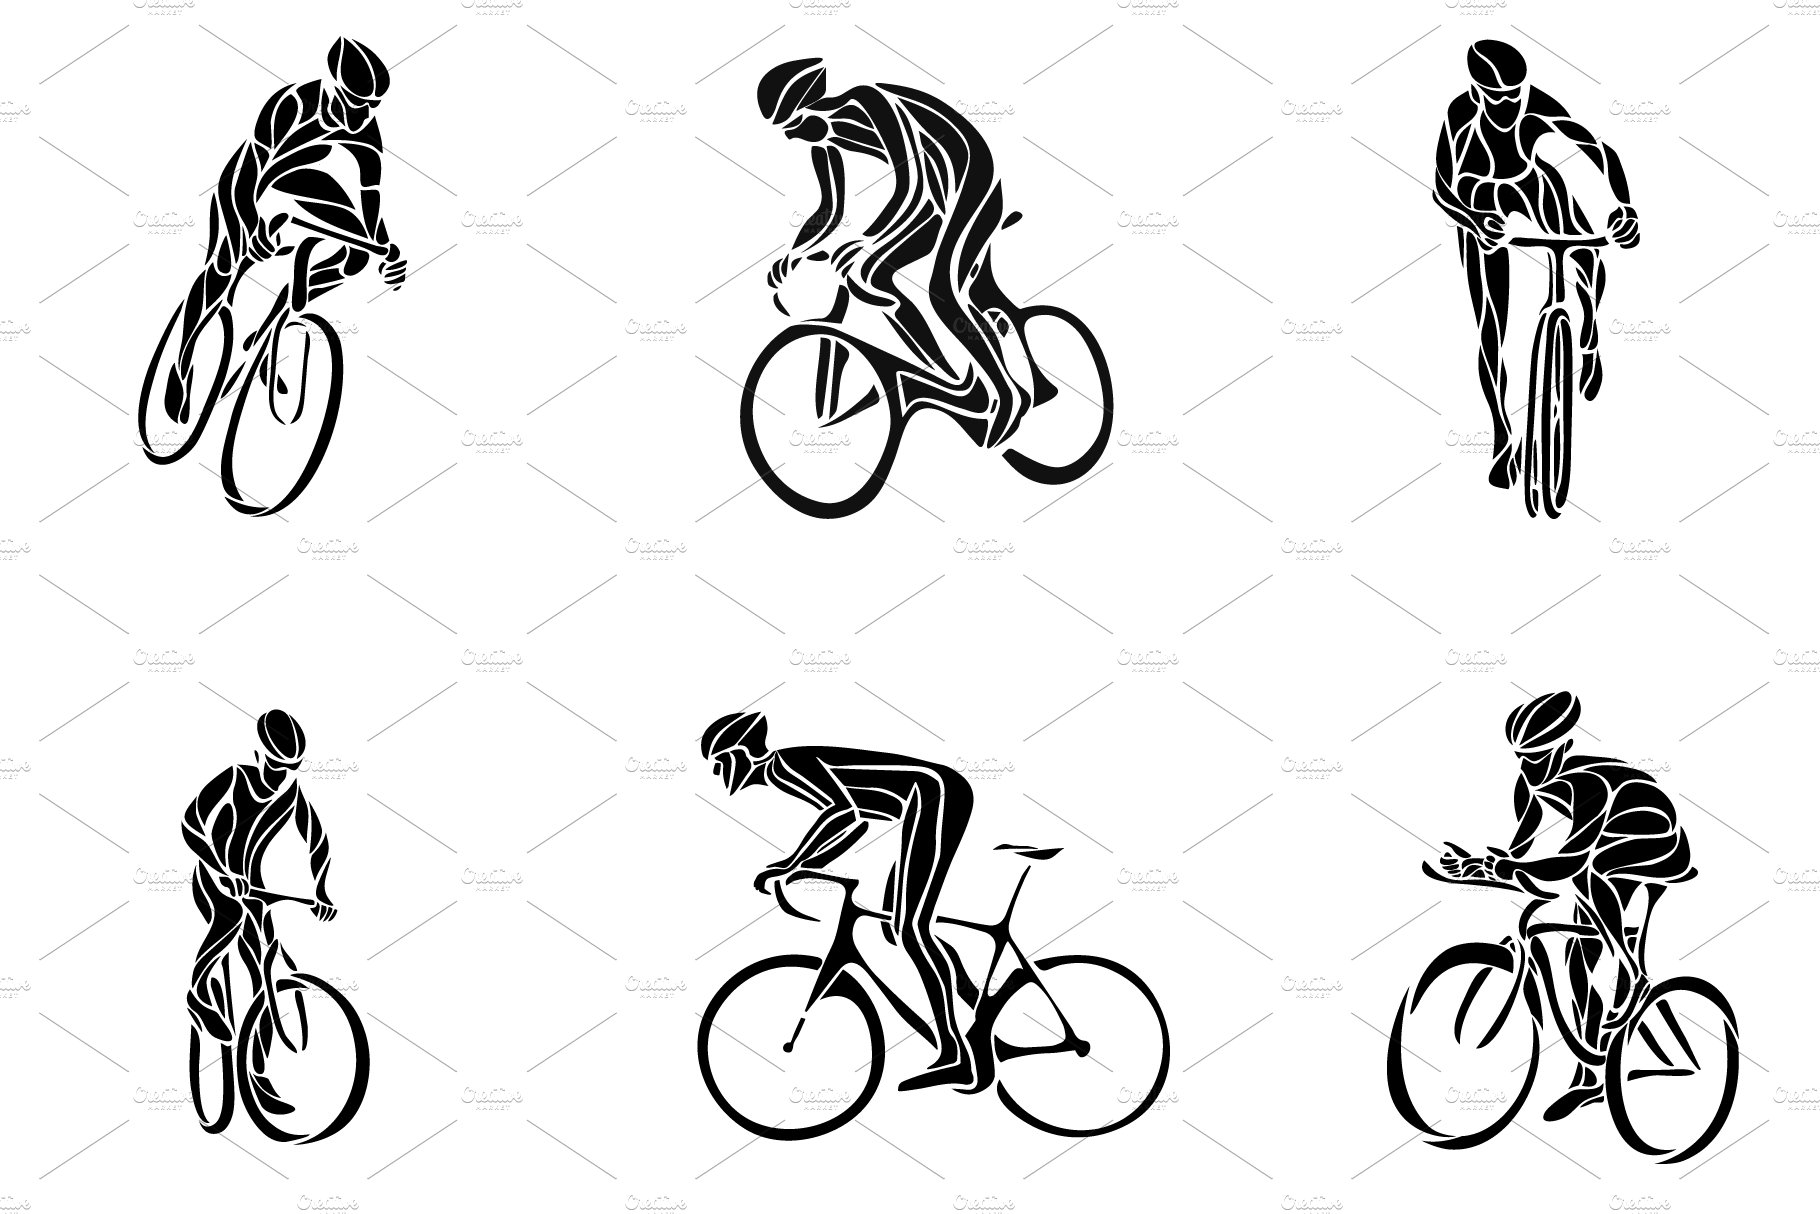 Diverse of bicycler body positions.